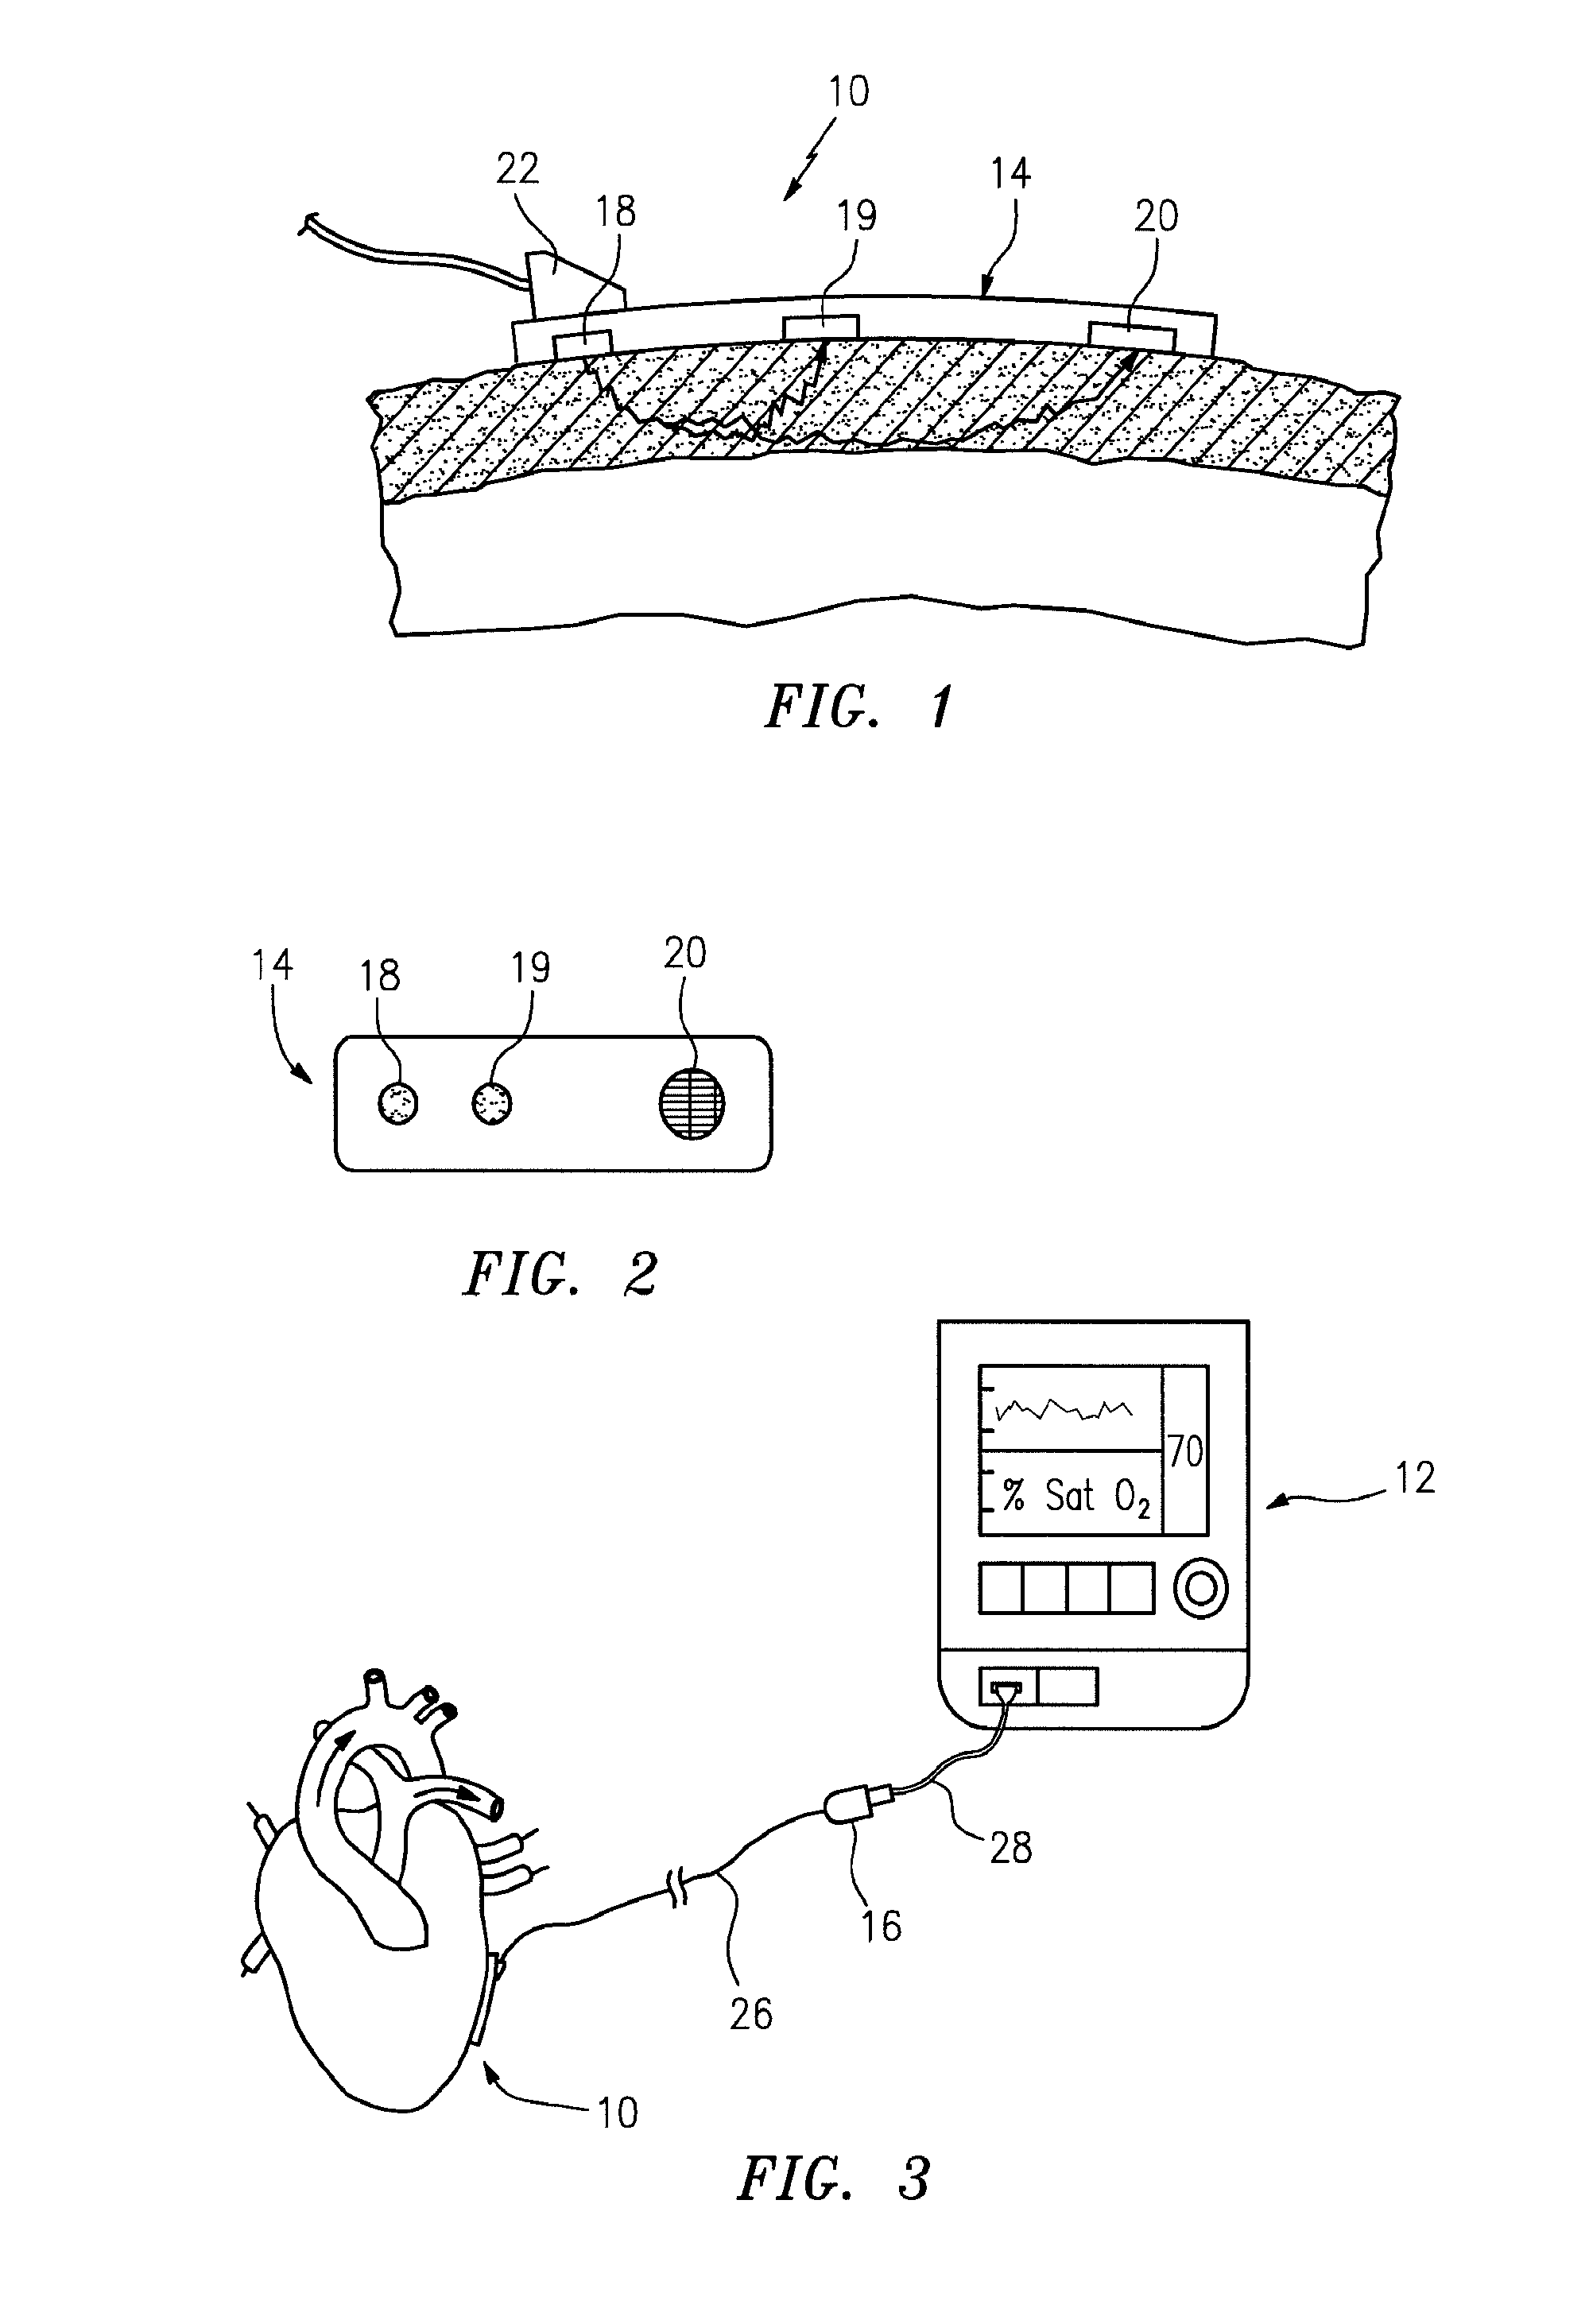 Method for spectrophotometric blood oxygenation monitoring of organs in the body